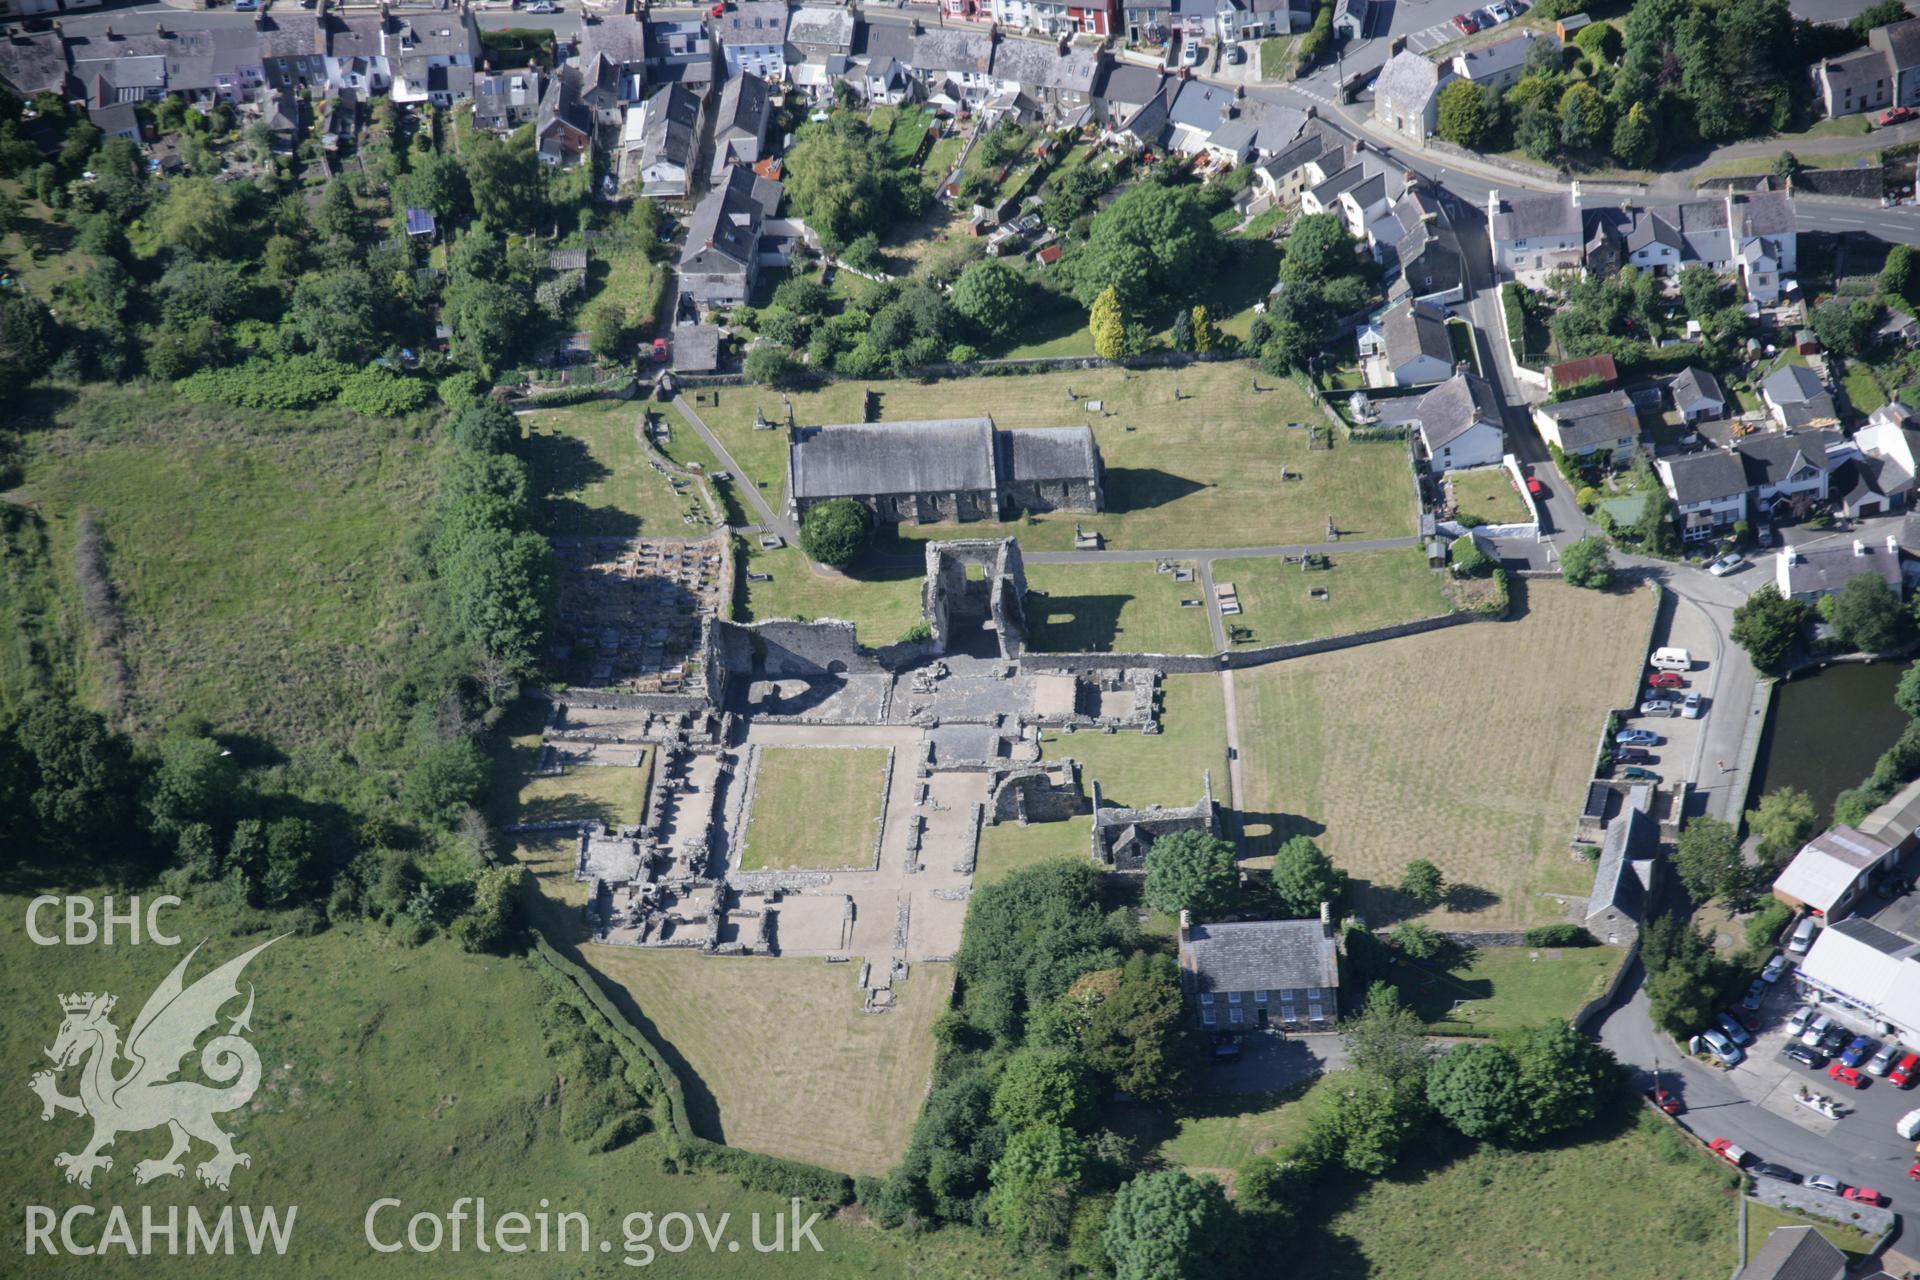 RCAHMW colour oblique aerial photograph of St Dogmaels Abbey from the south. Taken on 23 June 2005 by Toby Driver